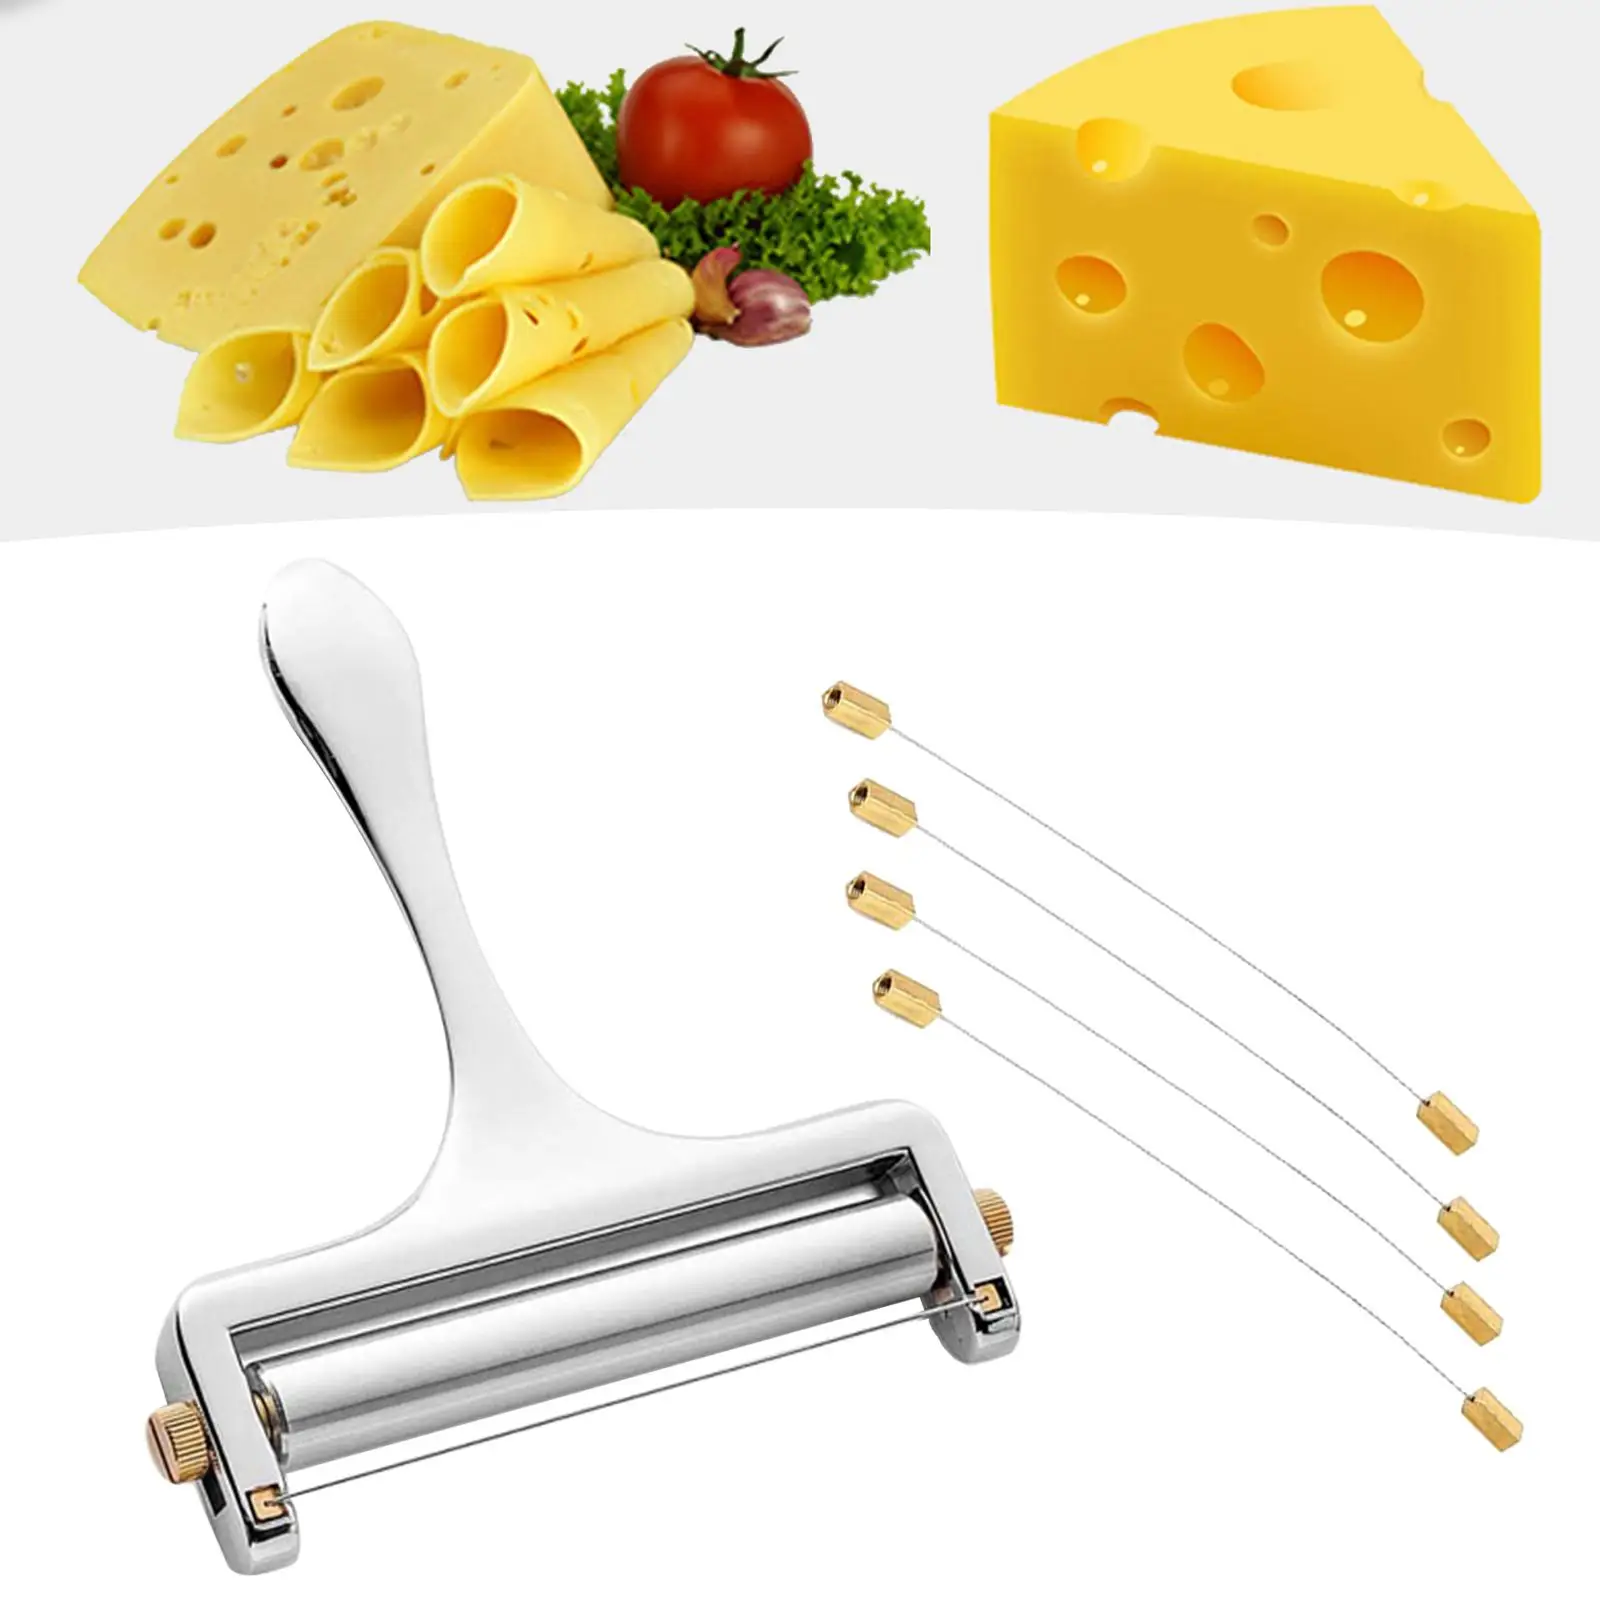 Cheese Slicer Adjustable Thickness Kitchen Cooking Curler Cheese Cutter Grater for Cheddar Raclette 4 Cutting Wires Included